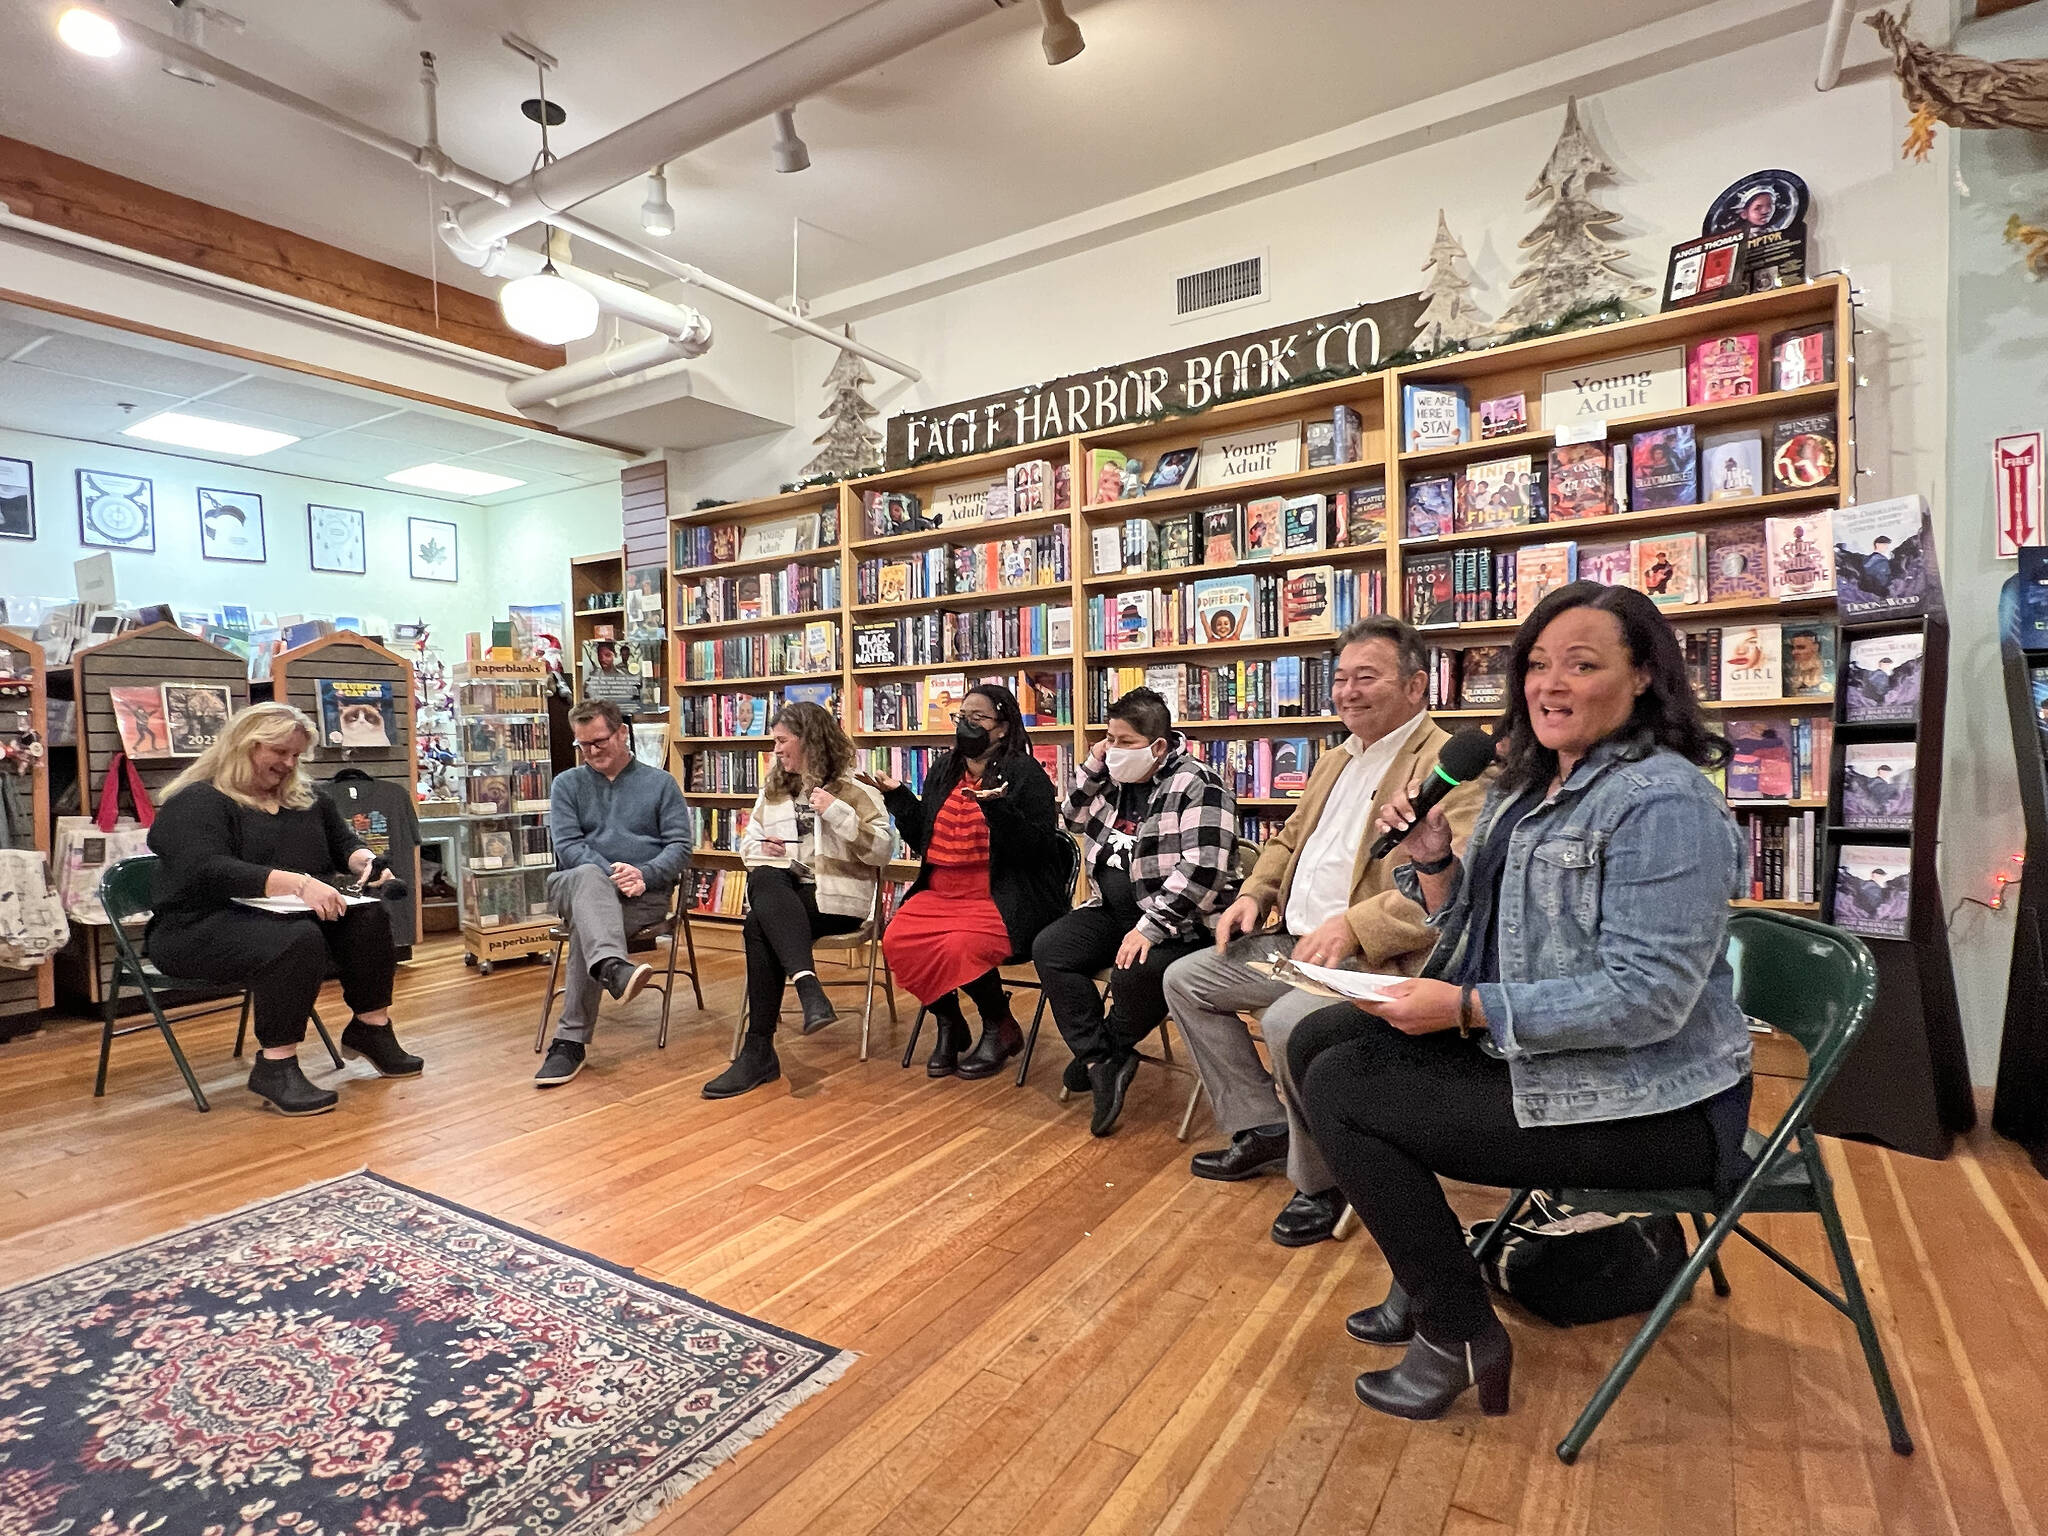 Chasity Malatesta moderates a conversation about racism during the BI Reads event at the Eagle Harbor Book Co. Nov. 9. Nancy Treder/Kitsap News Group Photos